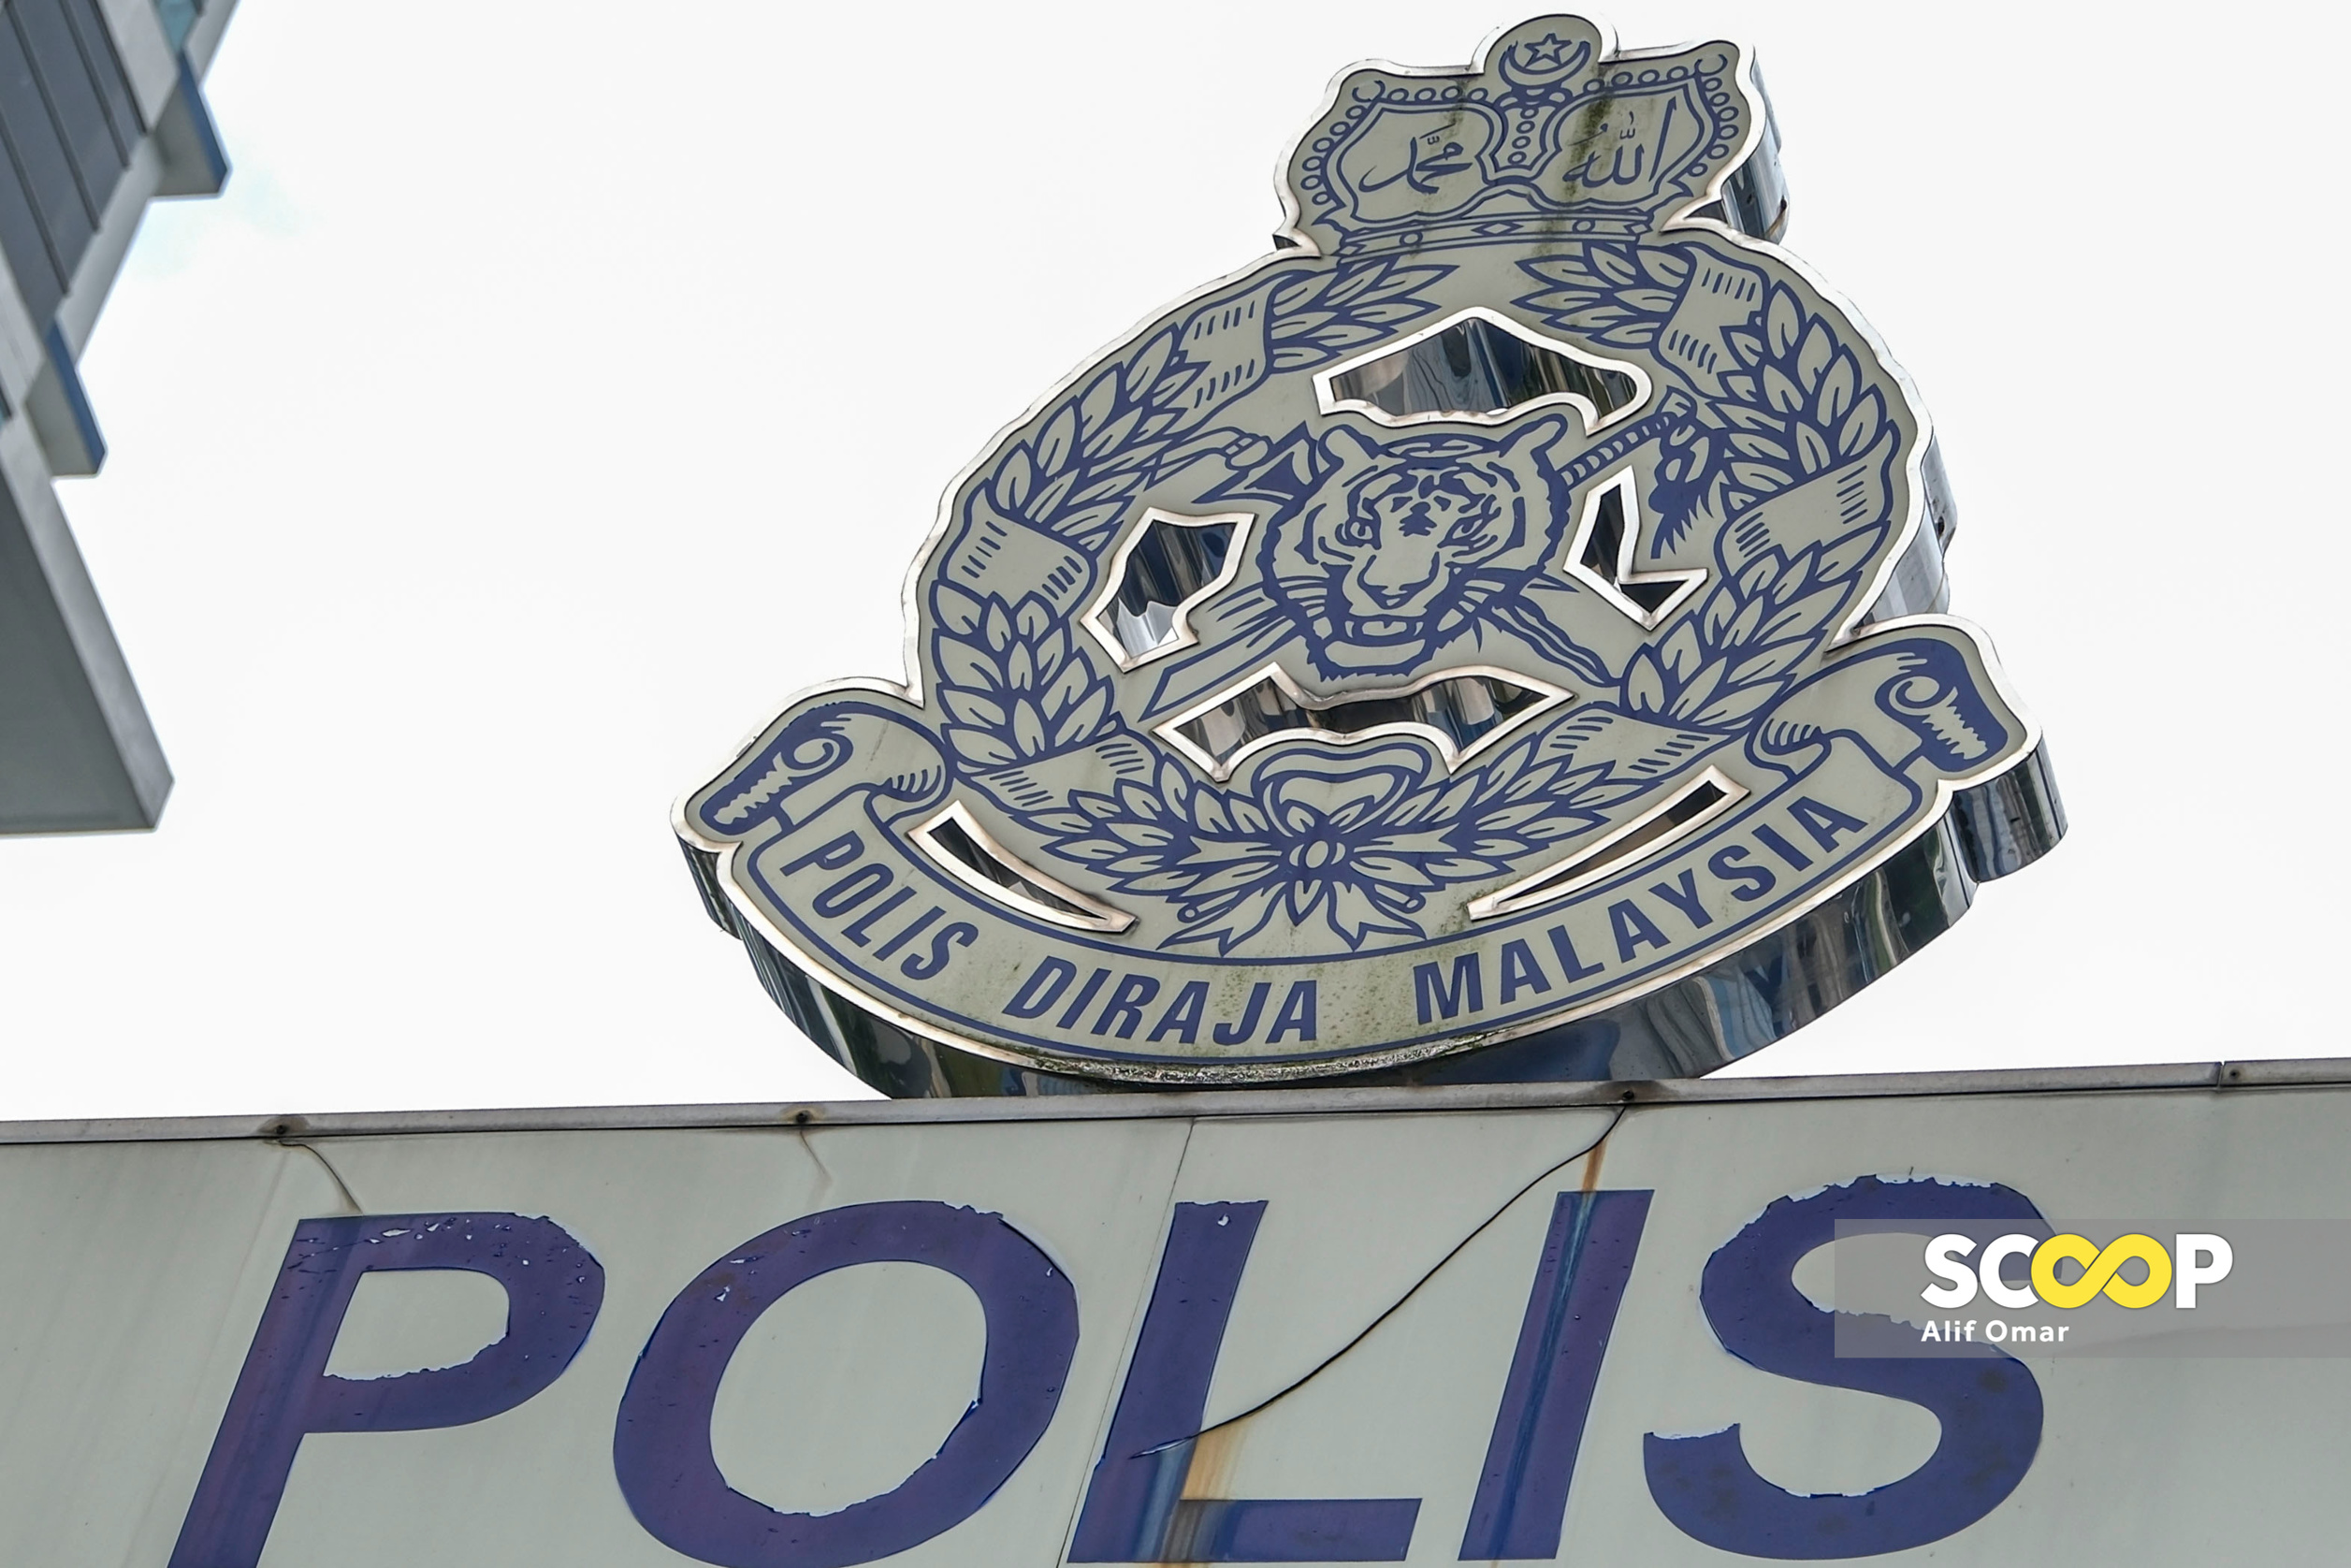 Johor police inspector to be suspended after allegedly sexually assaulting teen